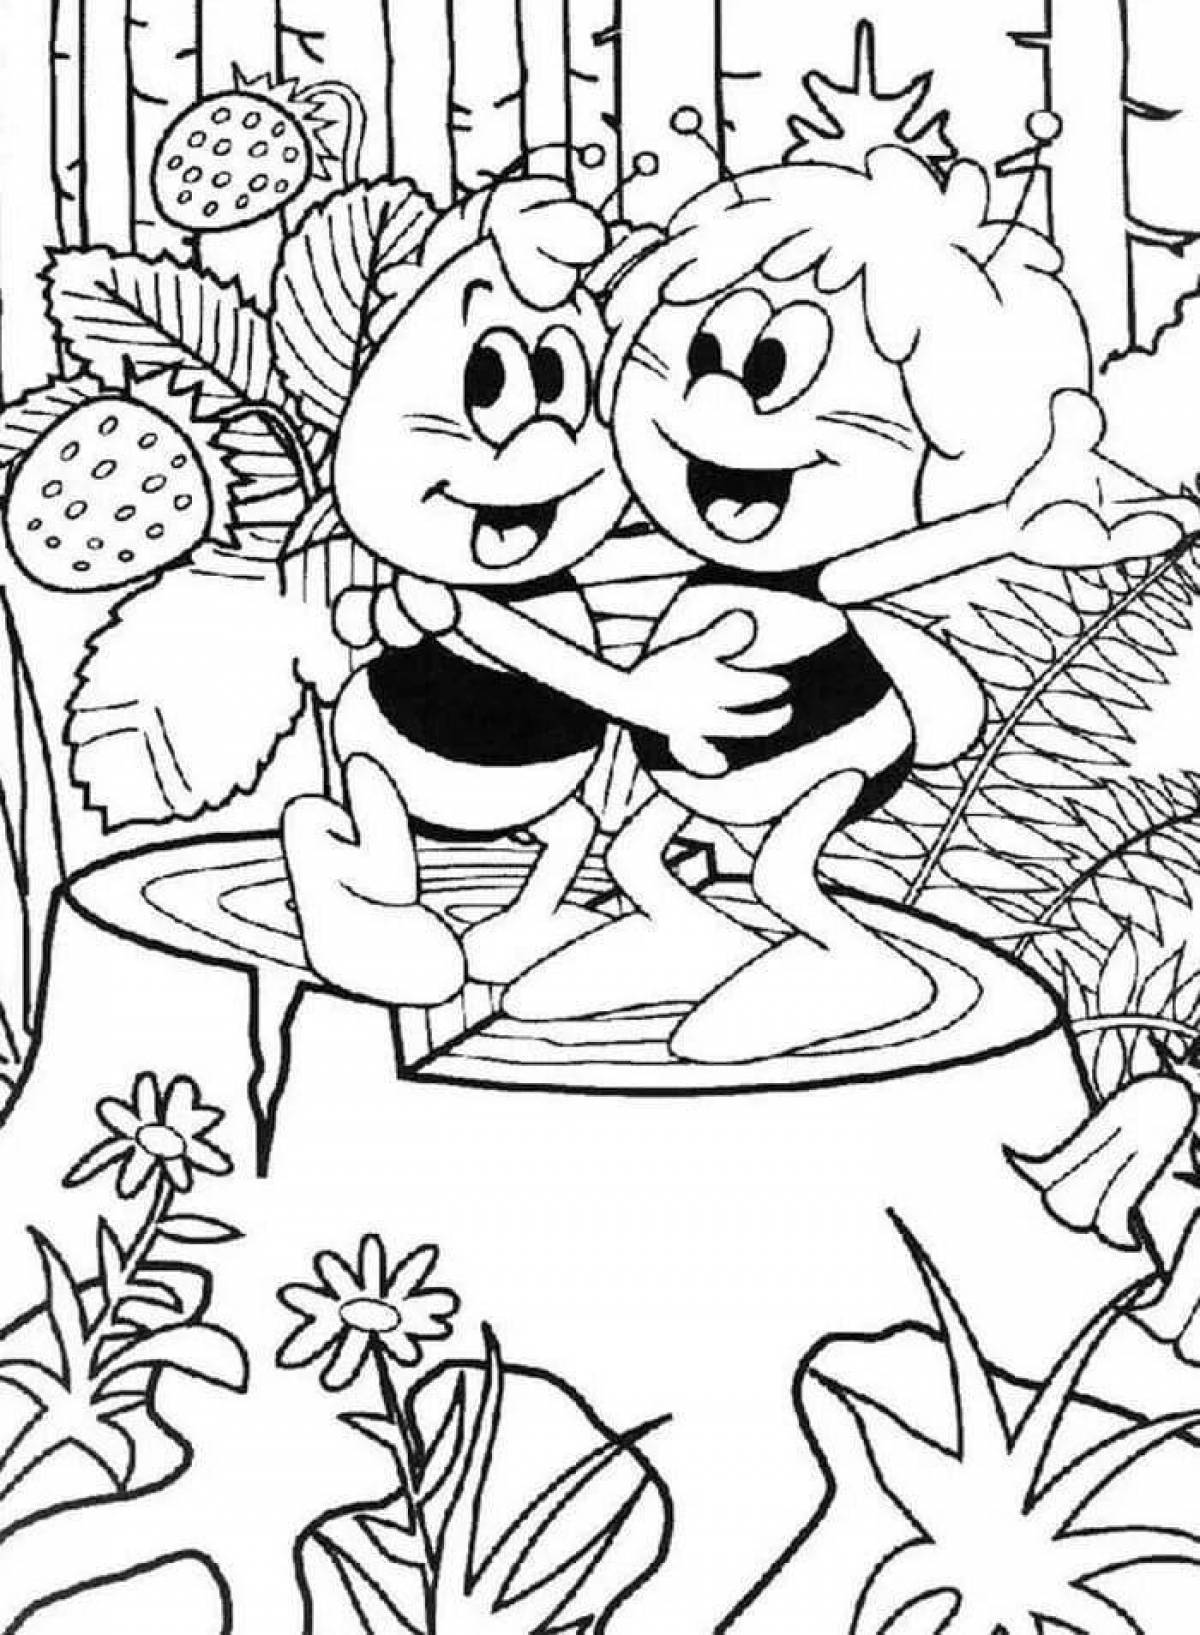 Adorable coloring book from modern cartoons